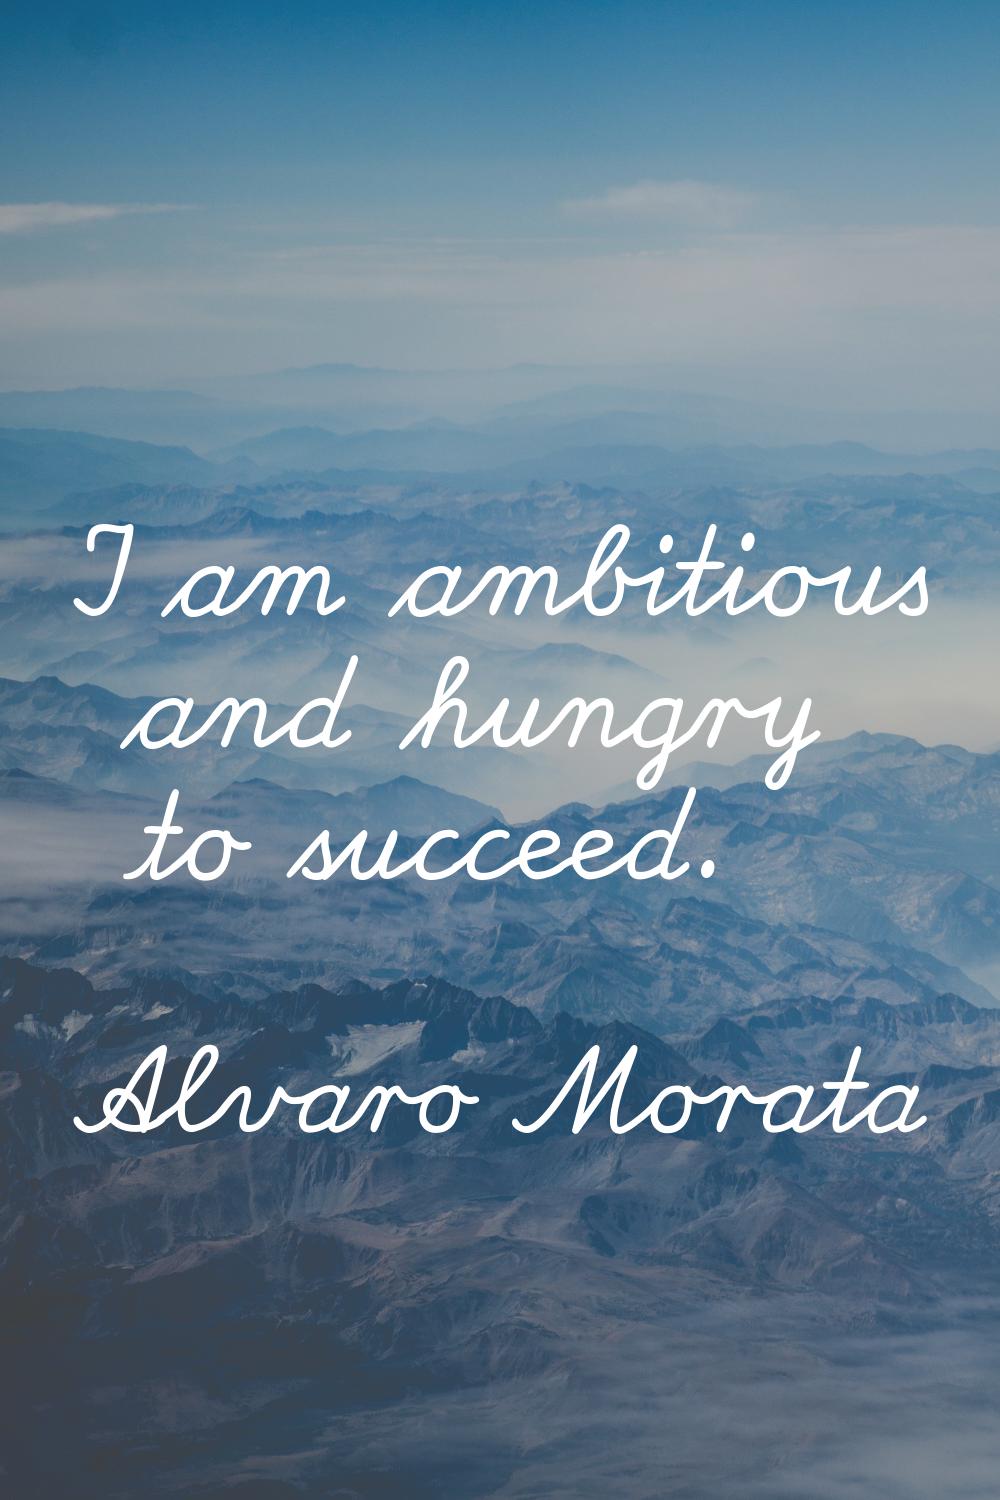 I am ambitious and hungry to succeed.